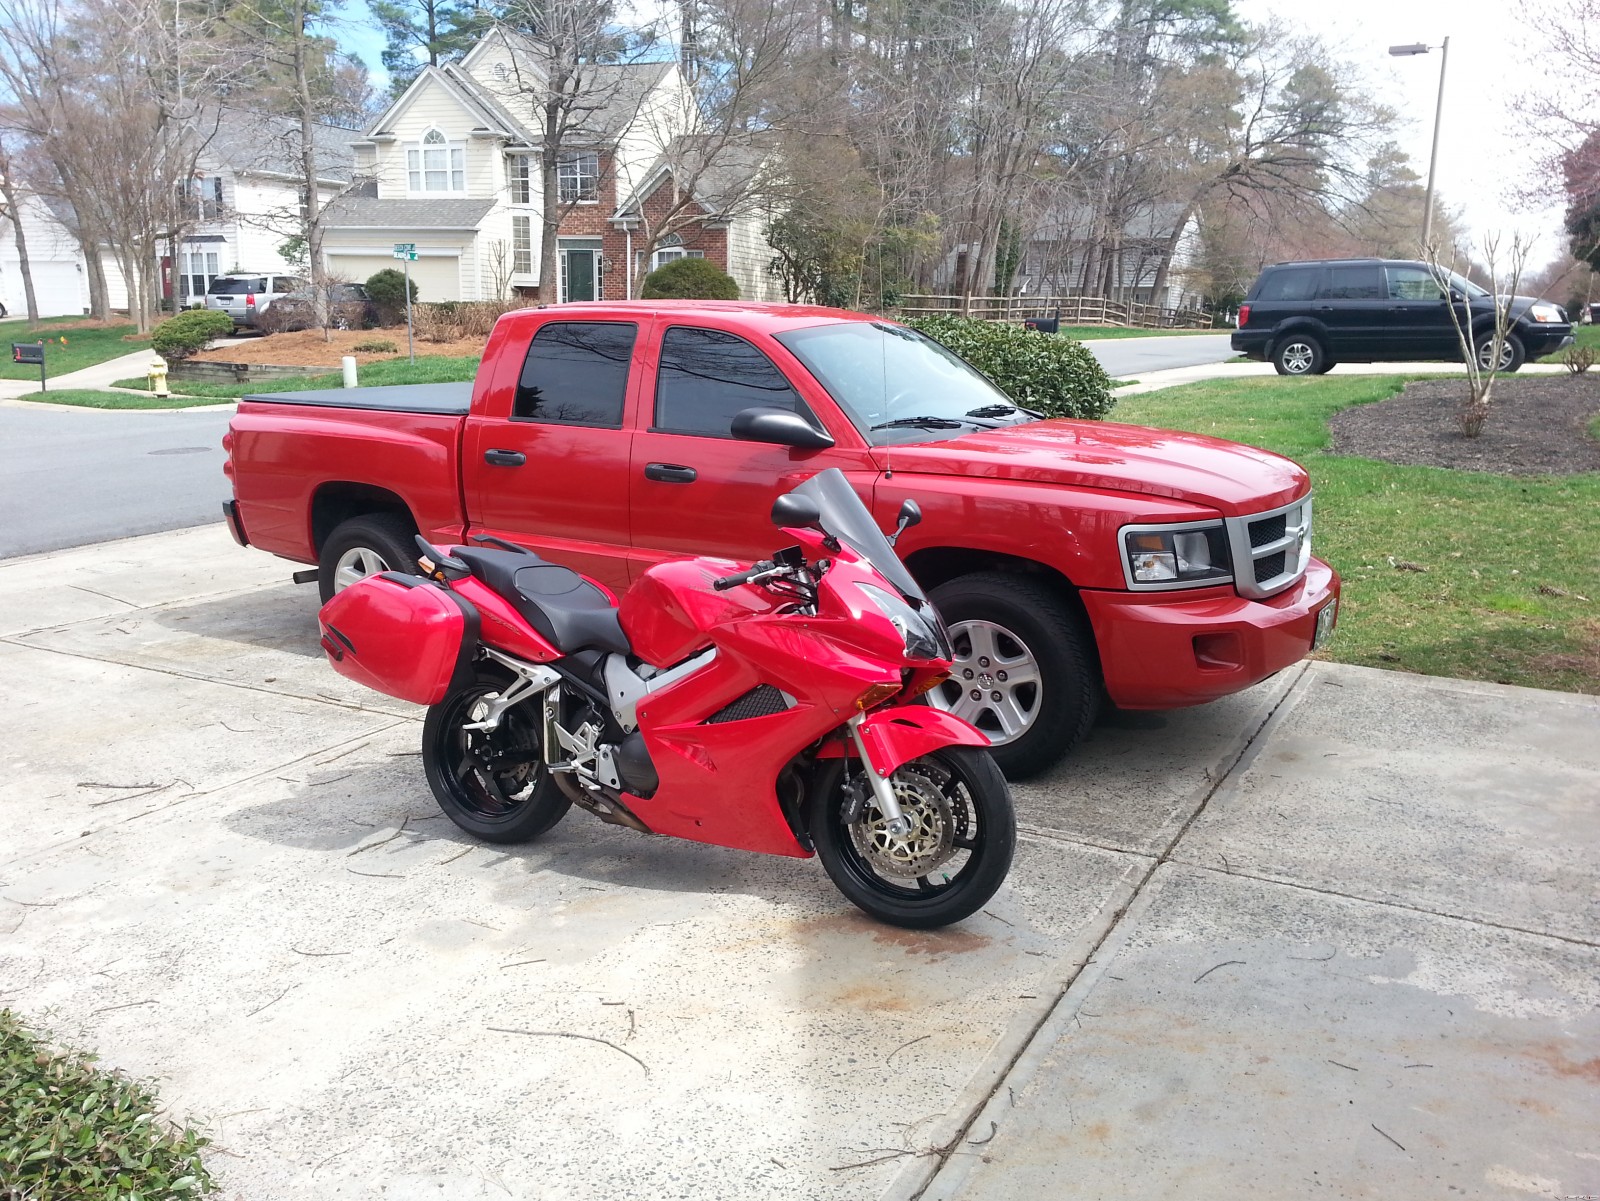 Big Red and Little Red Riding Good